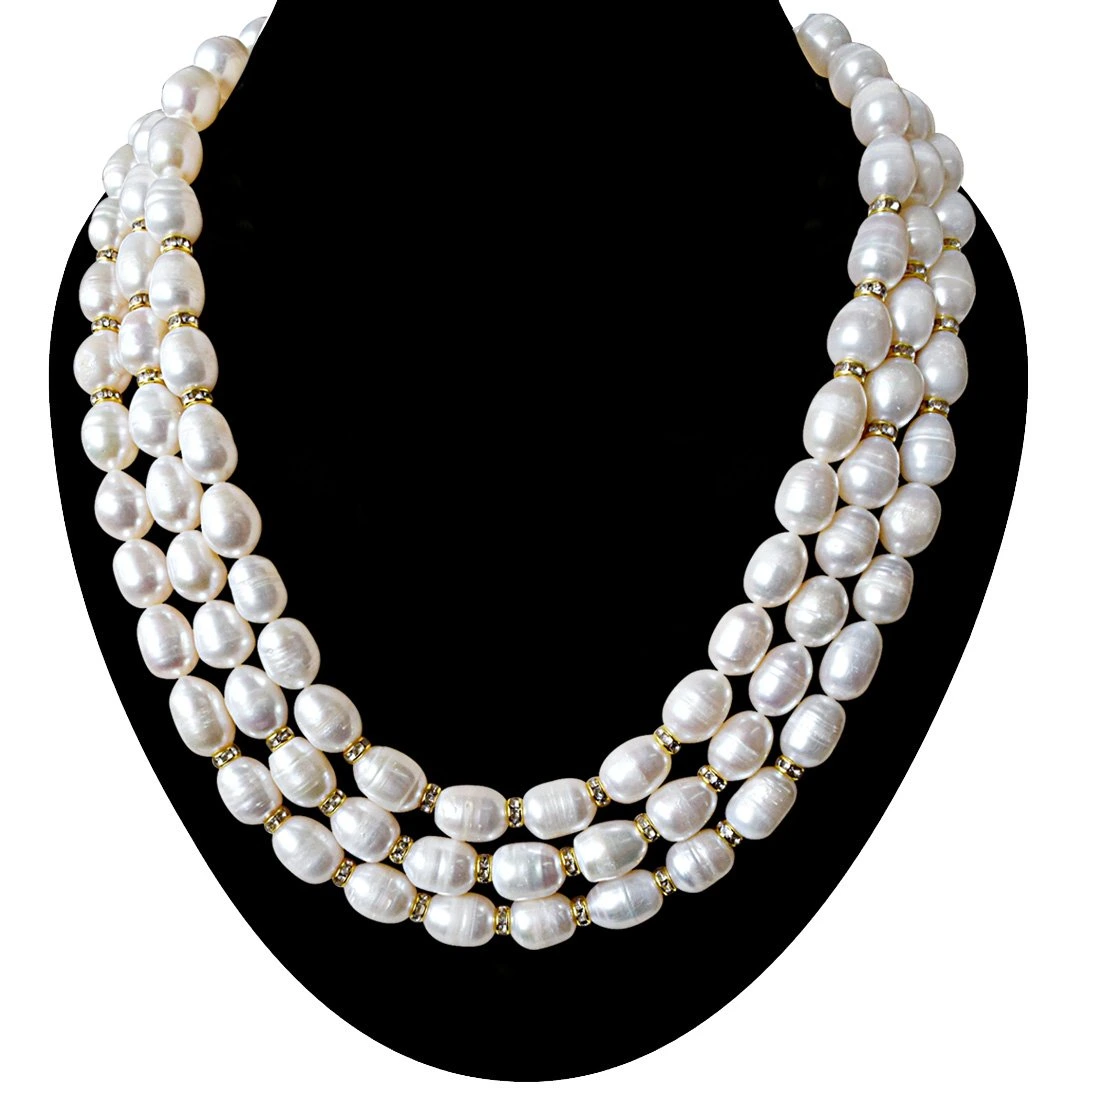 3 Line Heavy Looking Real Big Elongated Pearl and Stone Ring Necklace for Women (SN910)